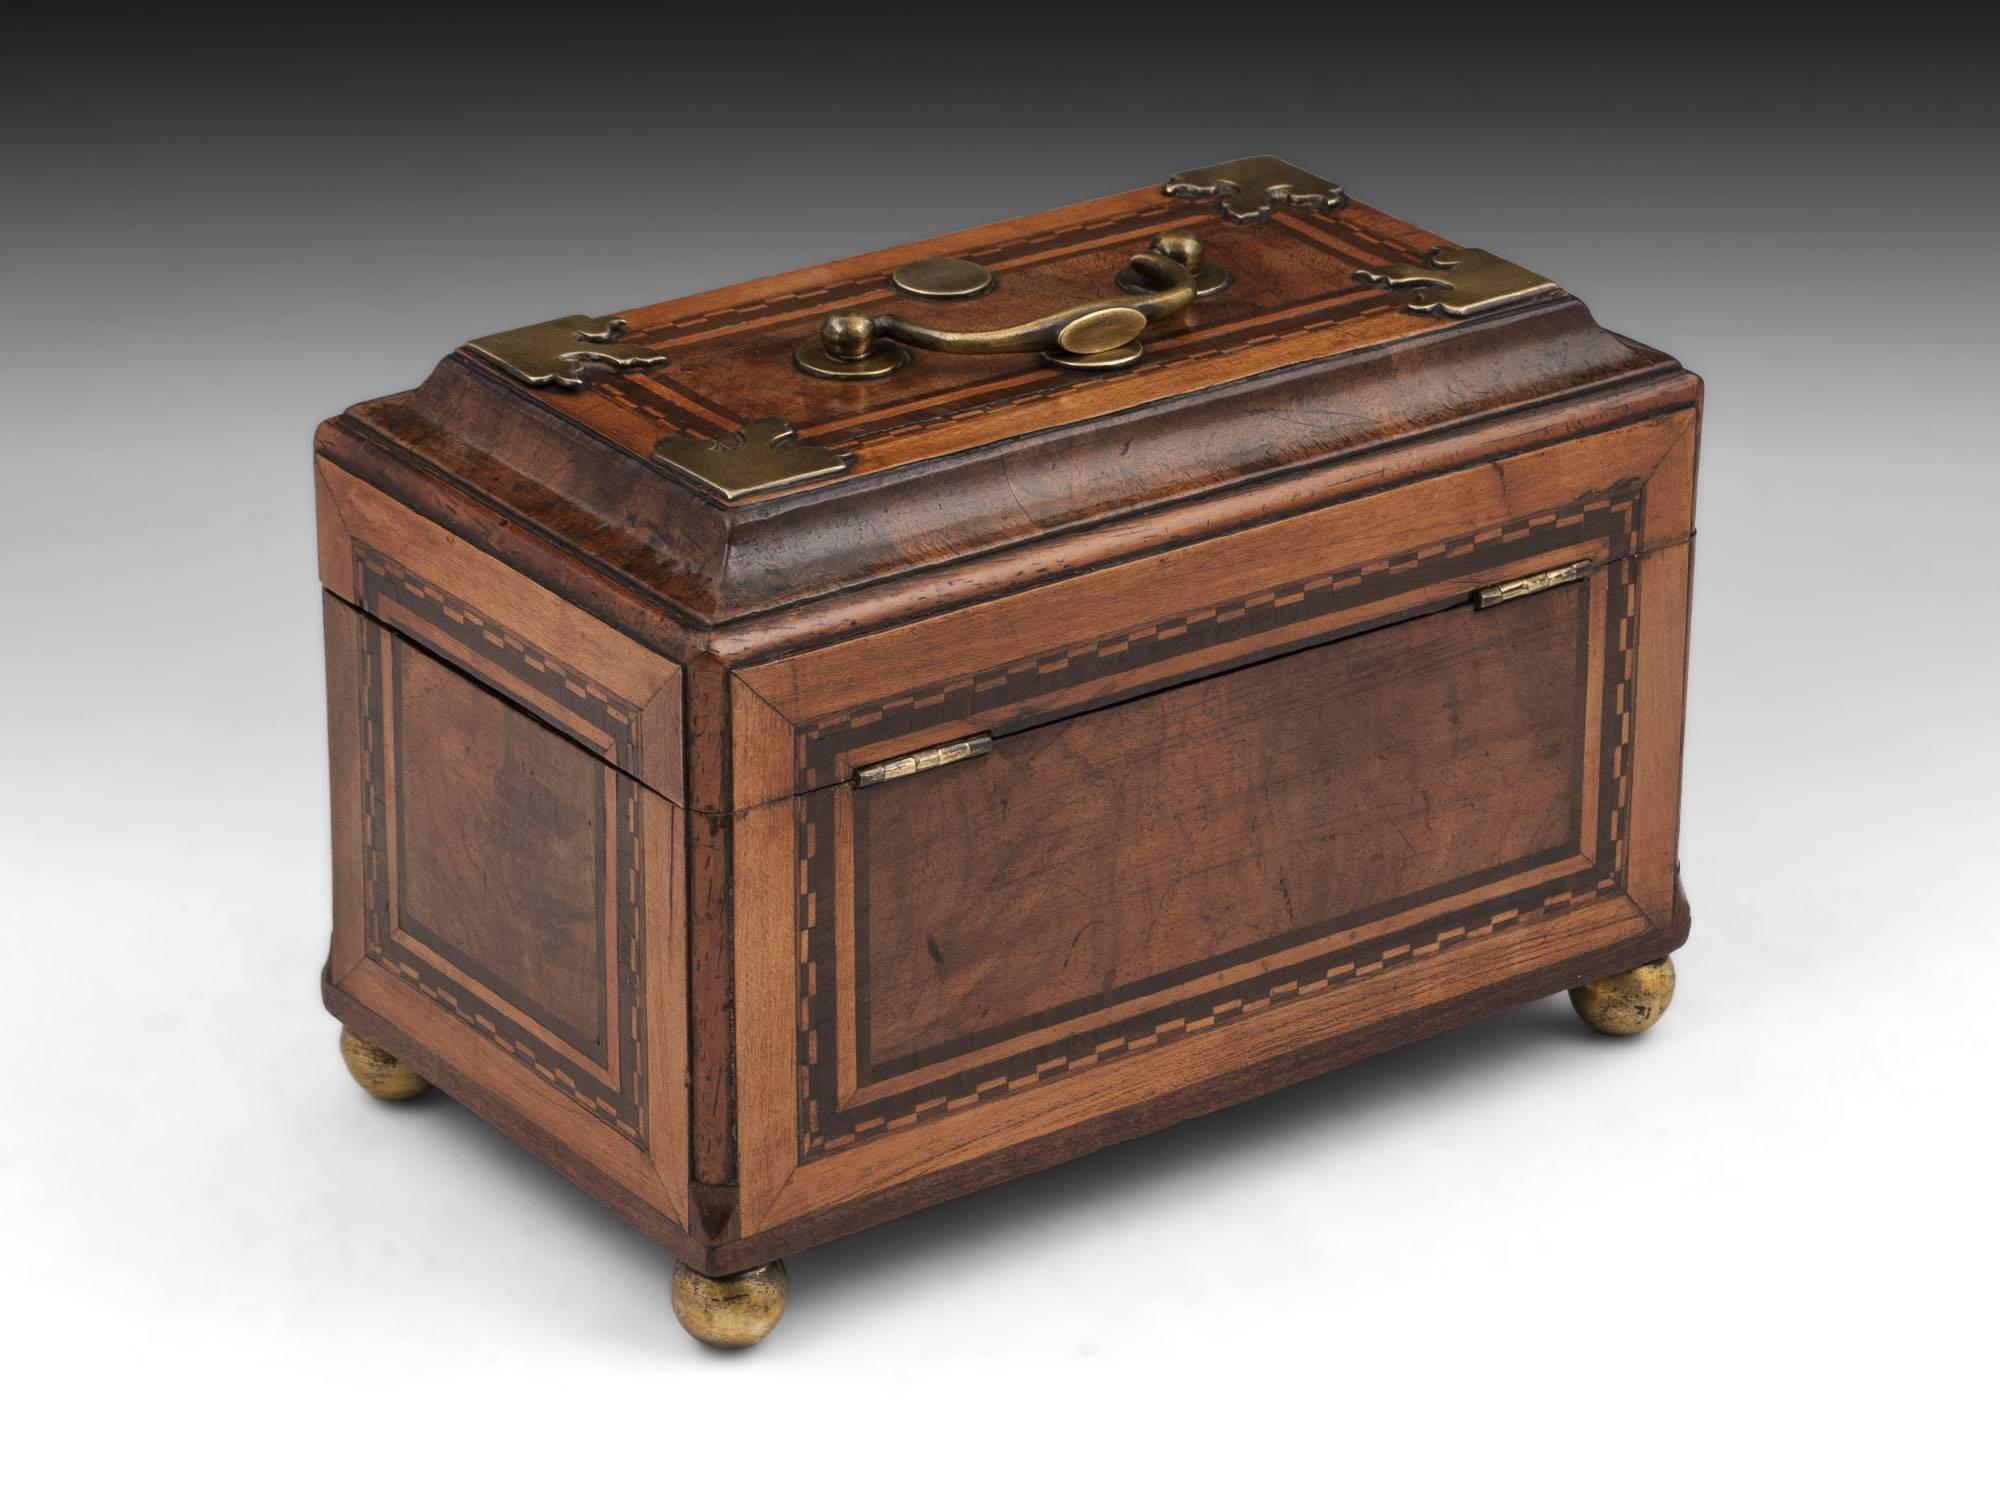 Antique Walnut and Brass Tea Chest Caddy 18th Century In Good Condition For Sale In Northampton, United Kingdom